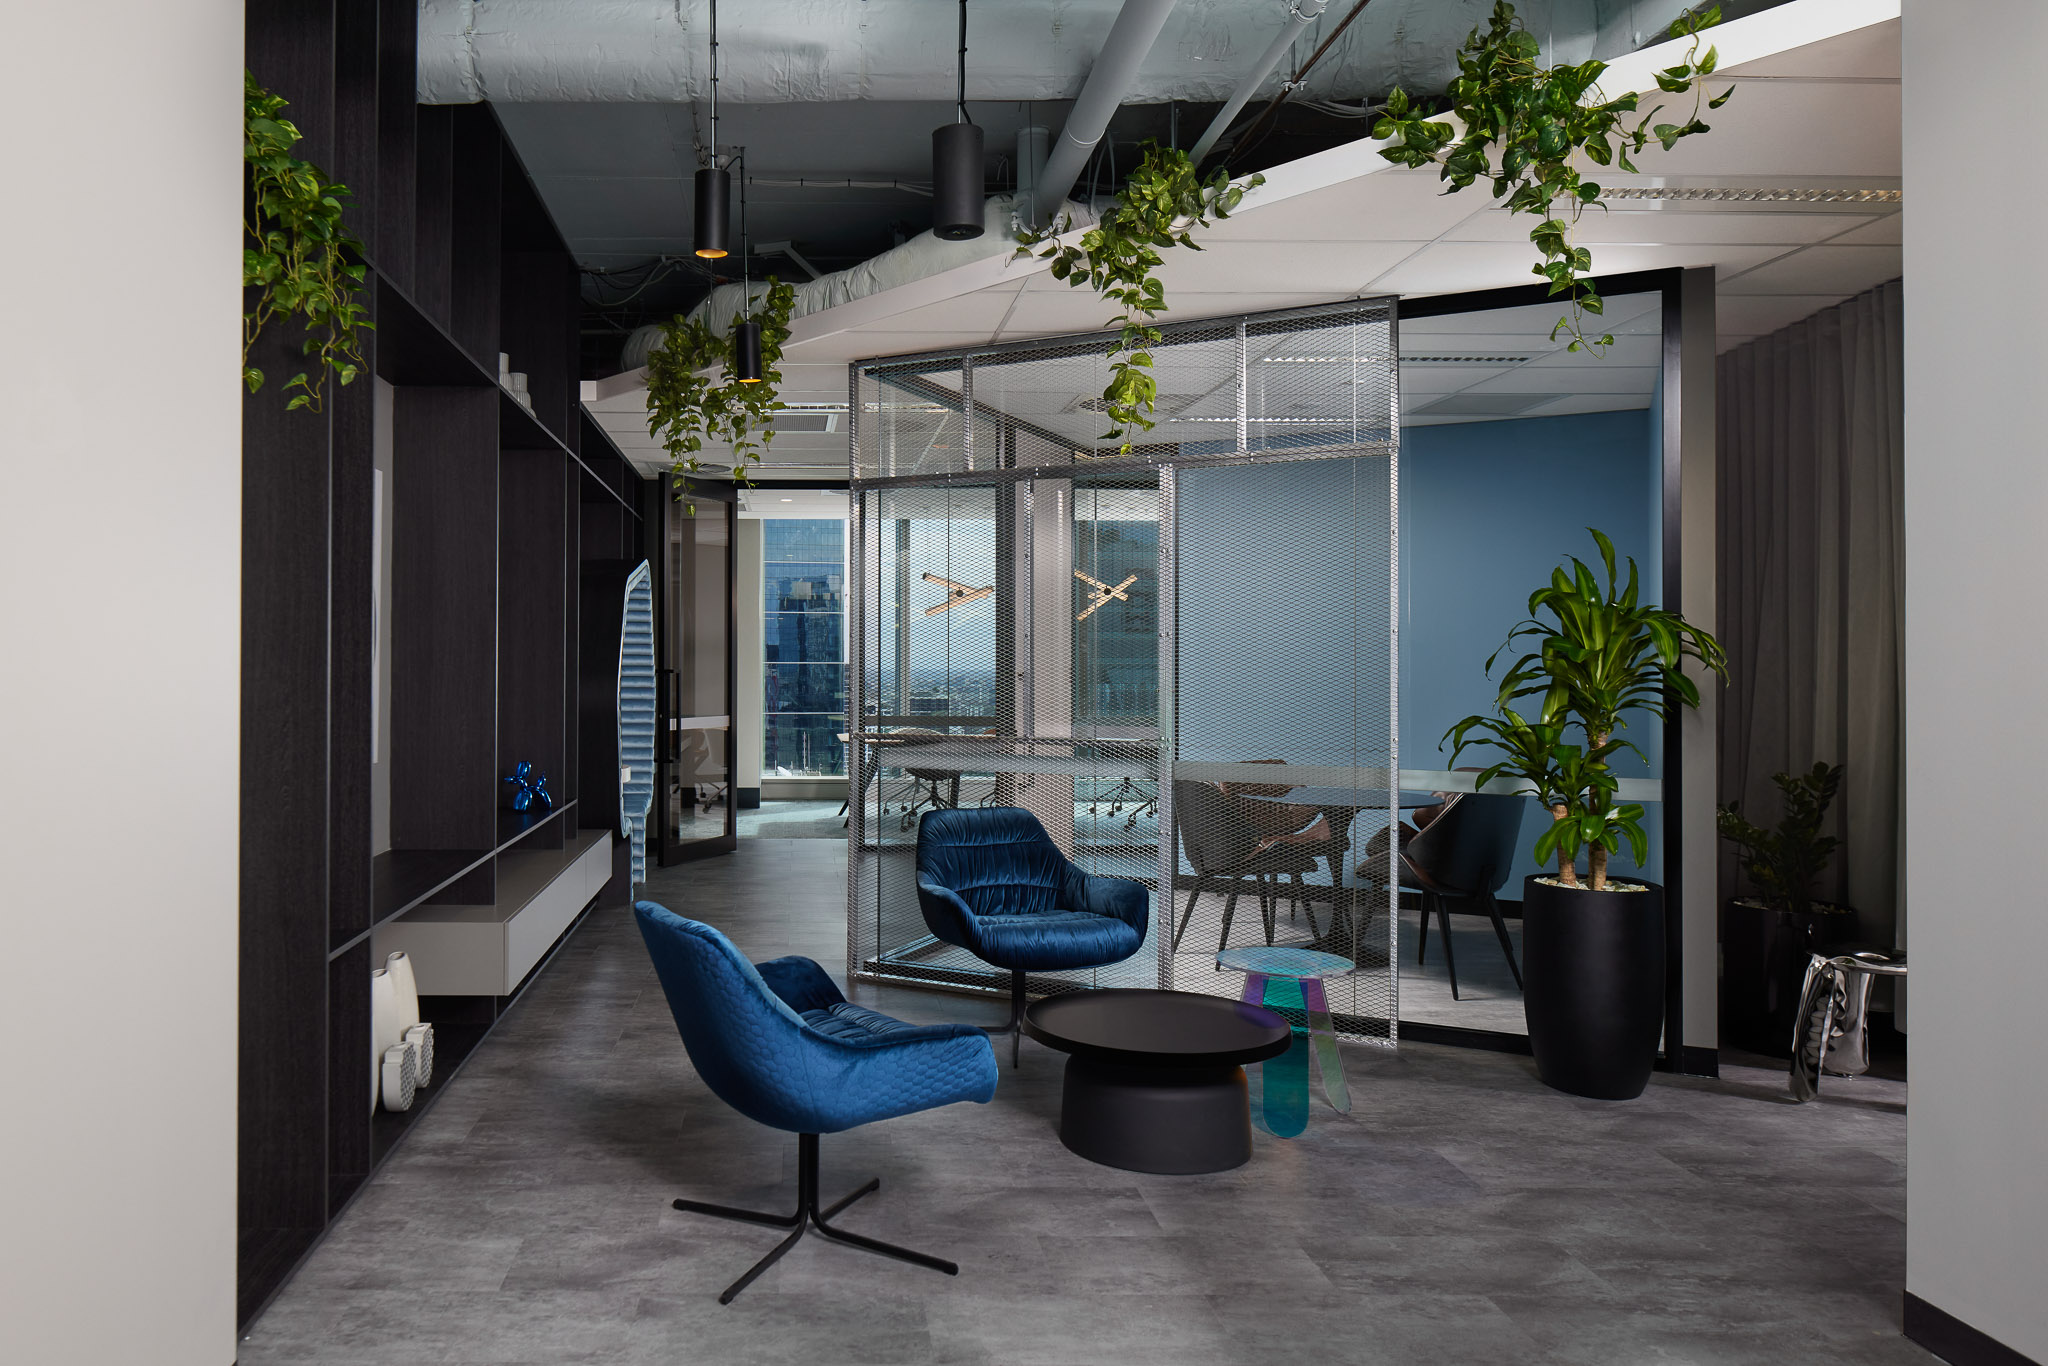 Office breakout space with blue velvet lounge chairs, small black coffee table, and meeting rooms in background